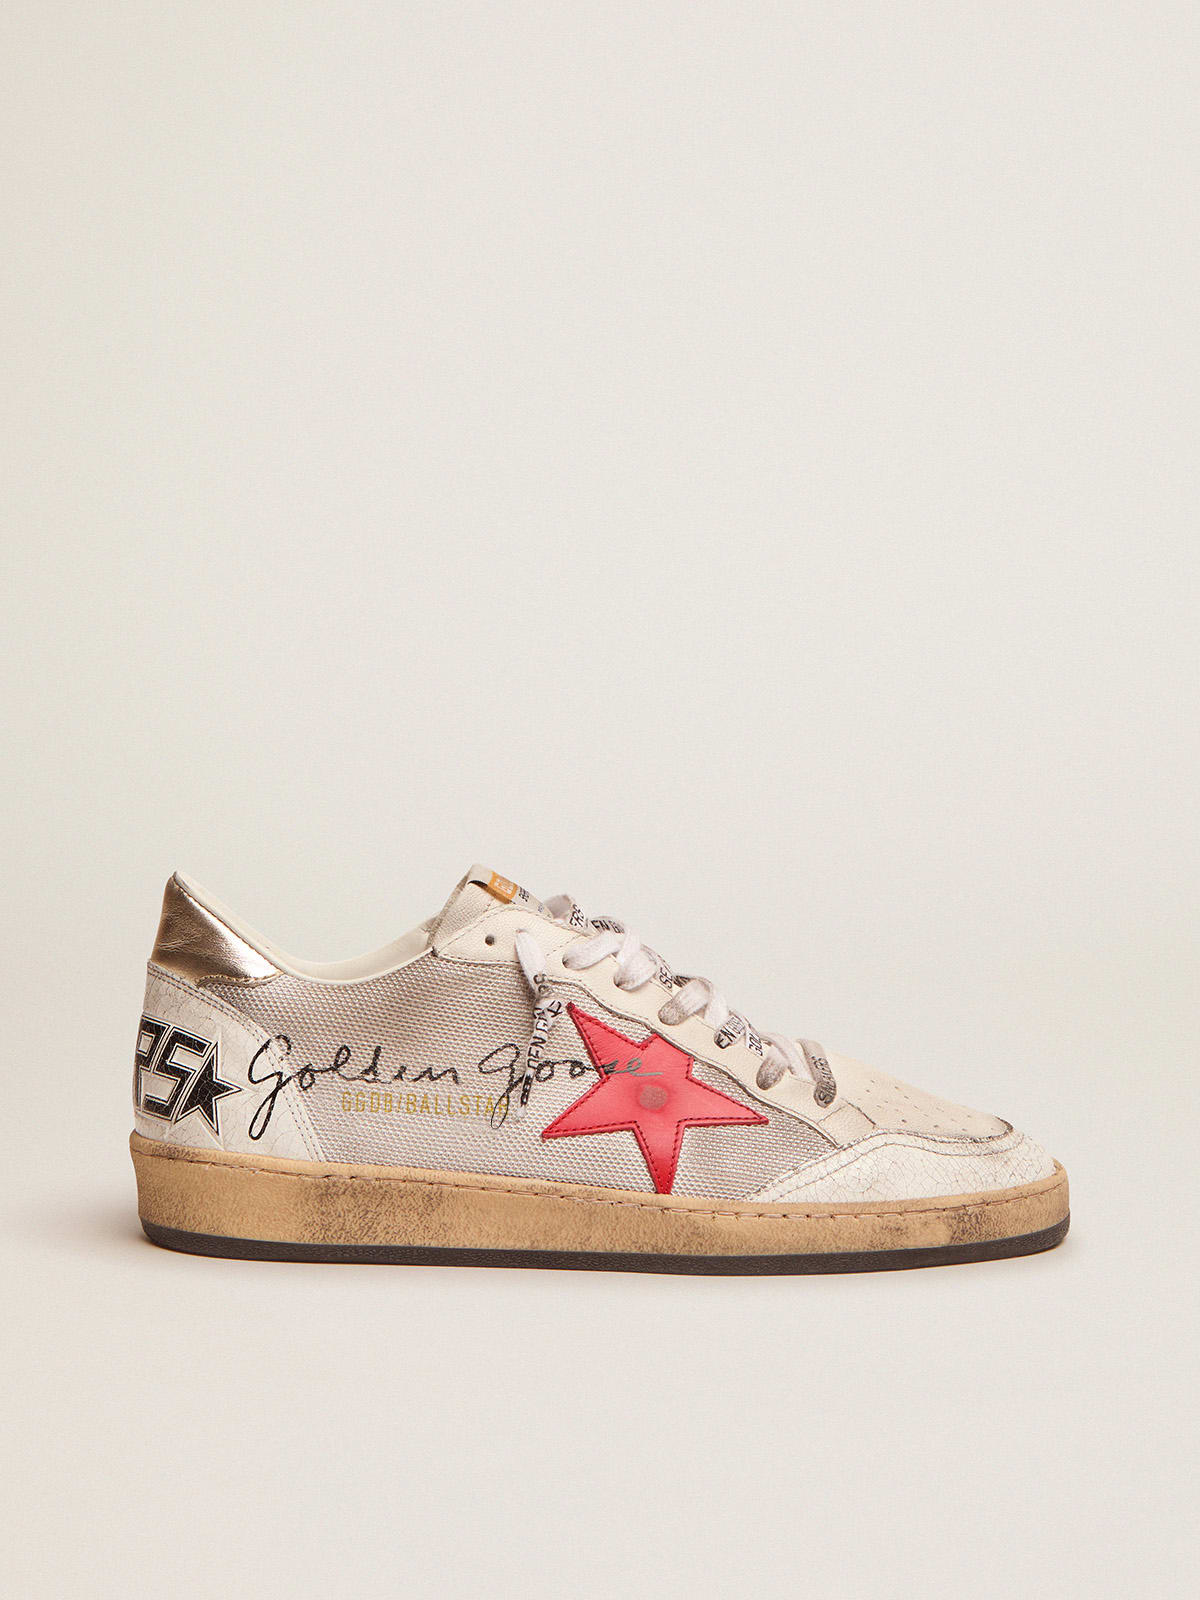 Ball Star sneakers in pale silver mesh with red leather star